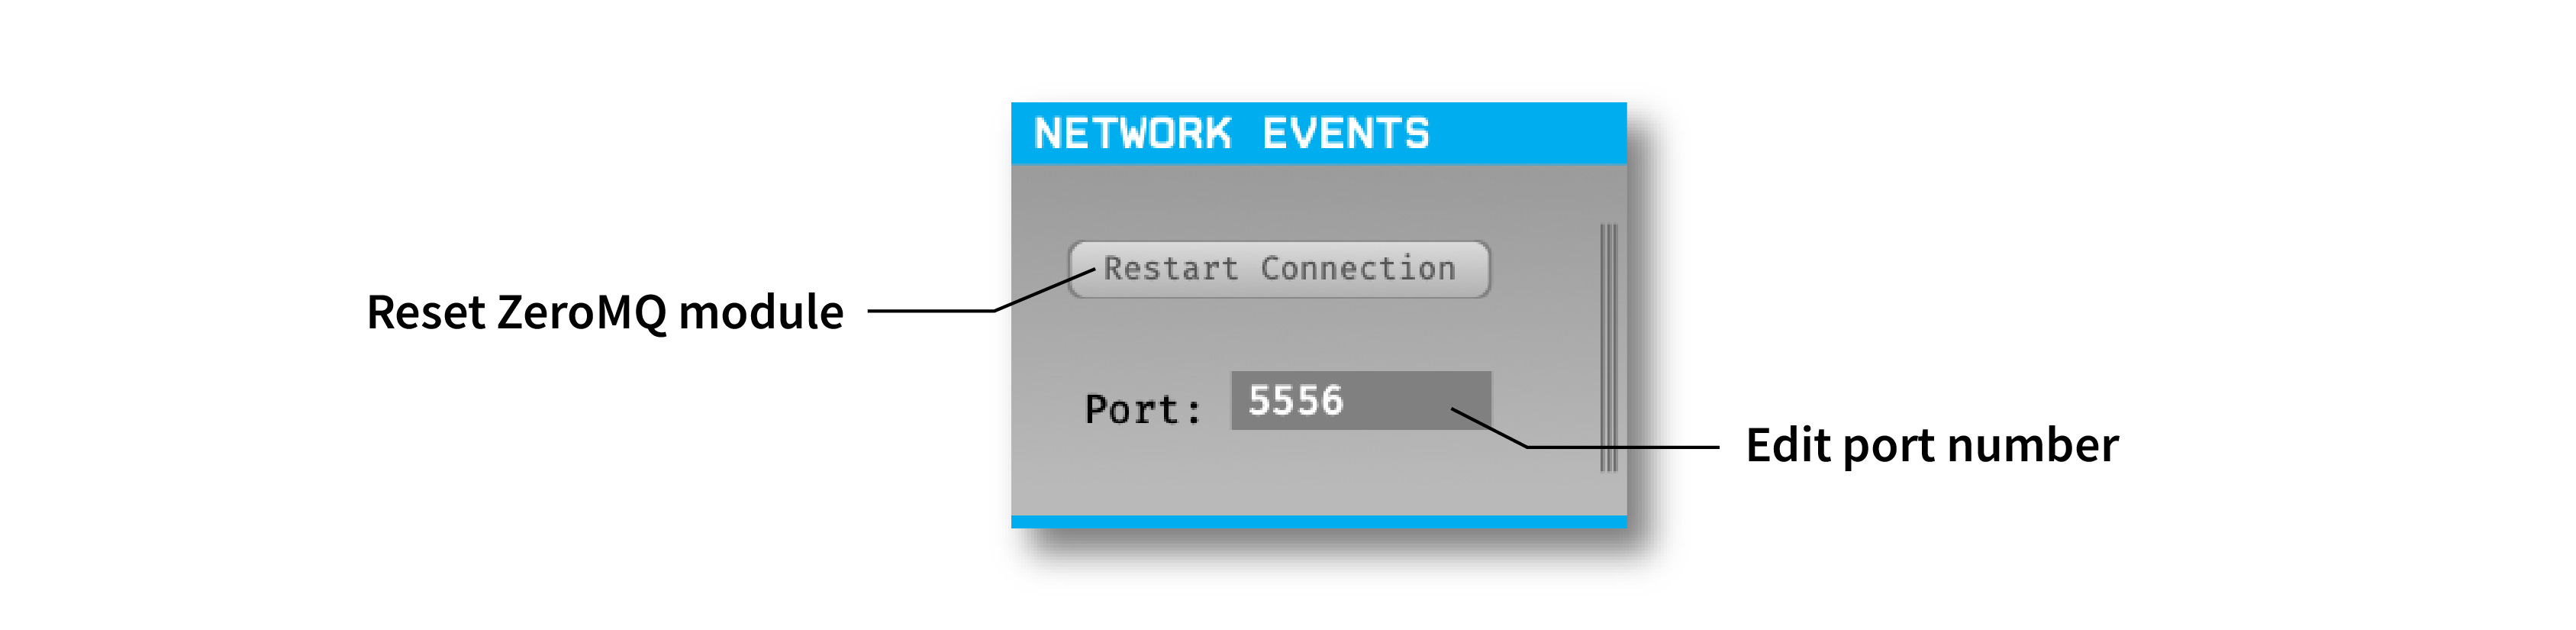 Annotated Network Events editor